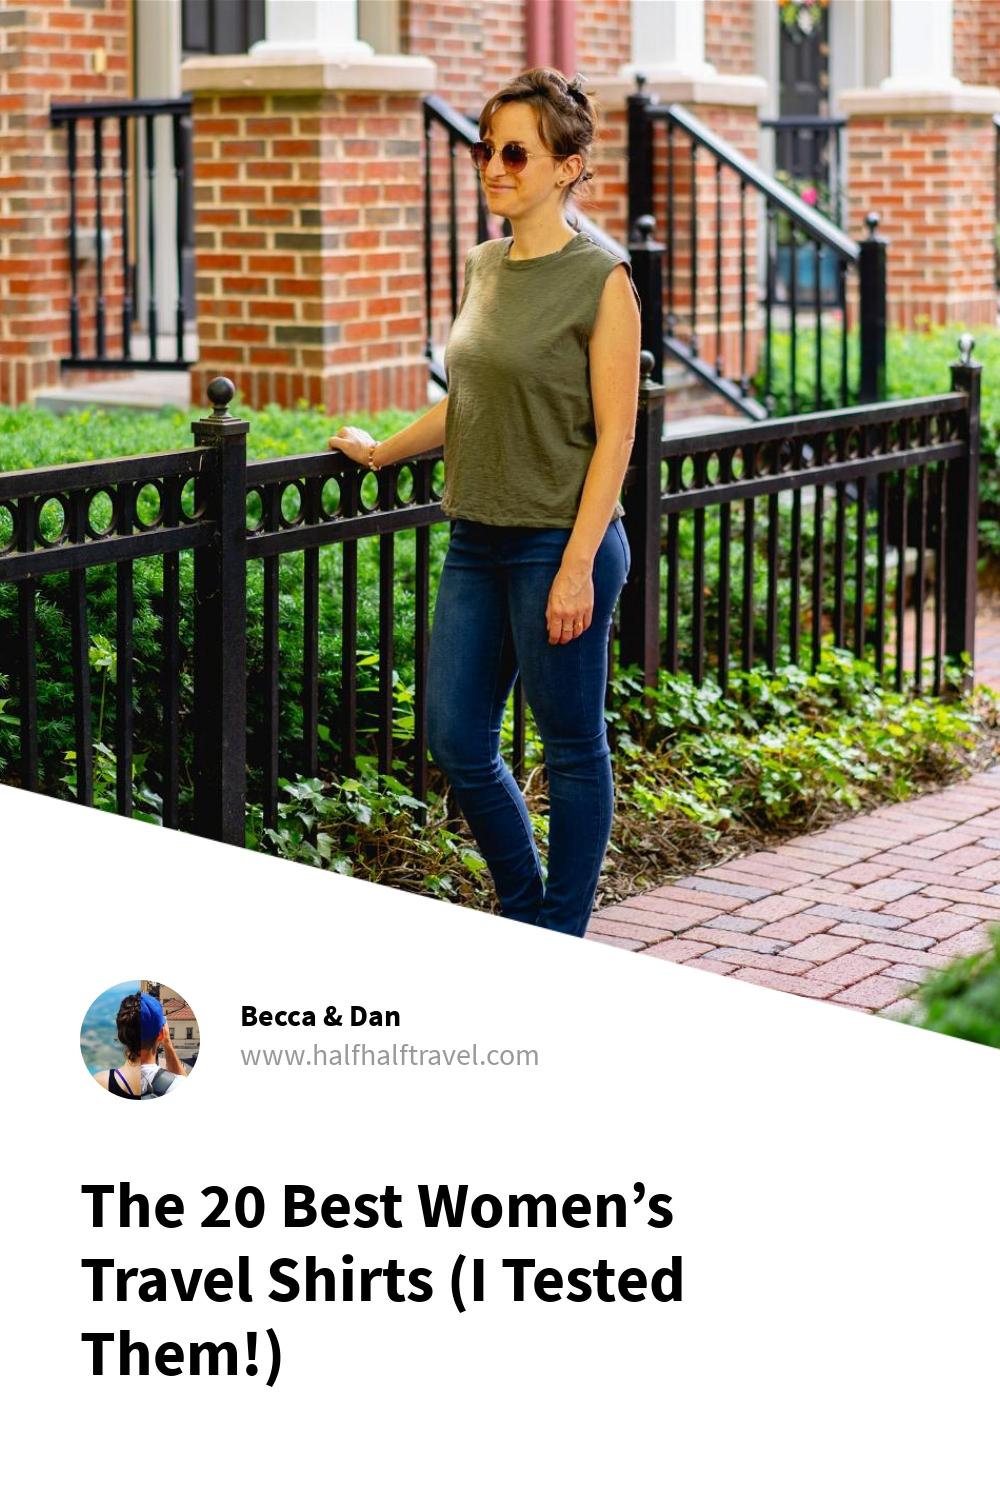 Pinterest image from the 'The 20 Best Women’s Travel Shirts (I tested them!)' article on Half Half Travel